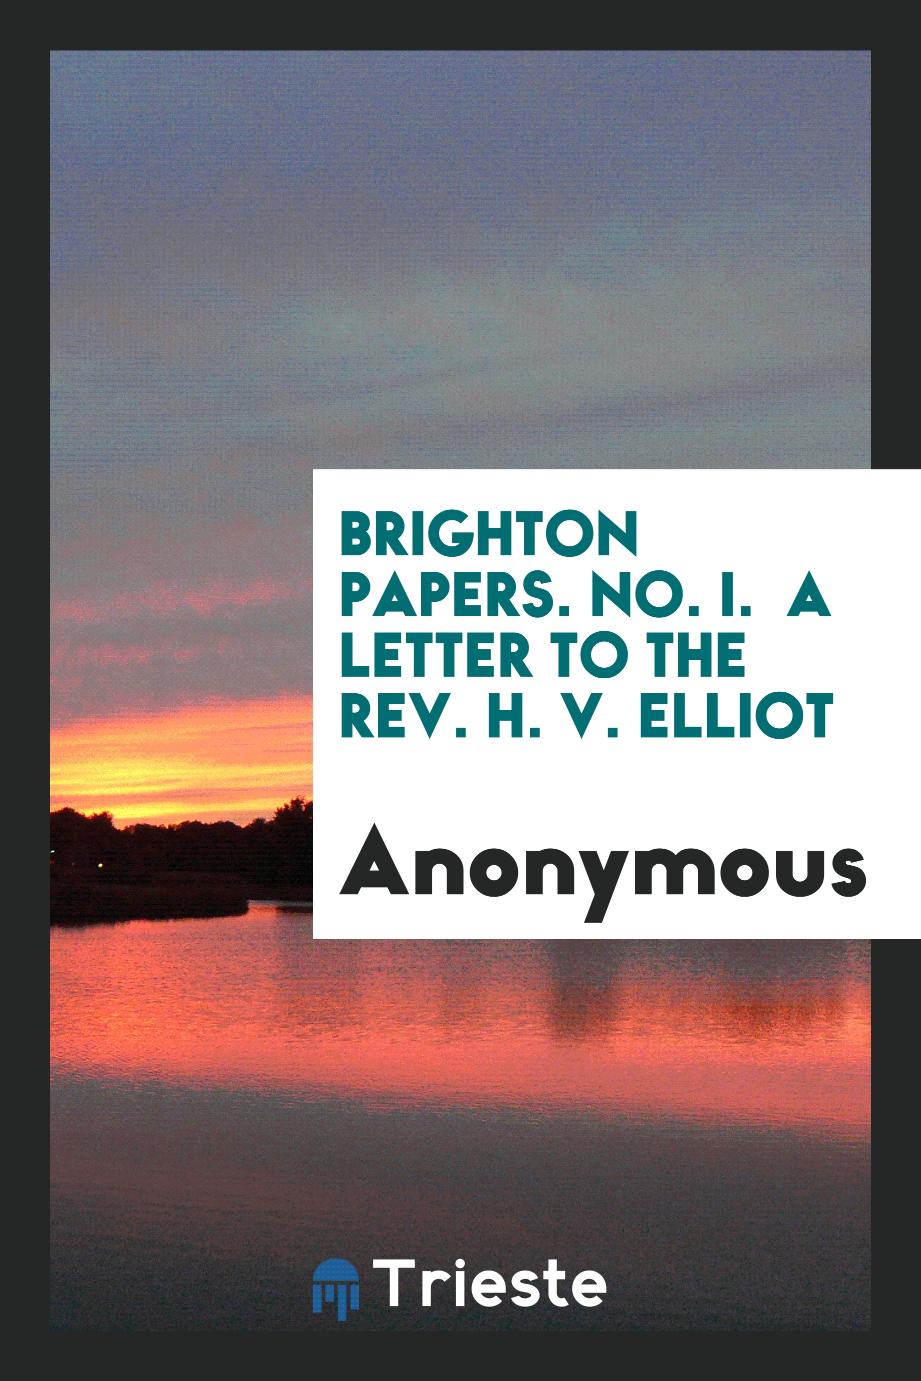 Brighton papers. No. I. A letter to the rev. H. V. Elliot